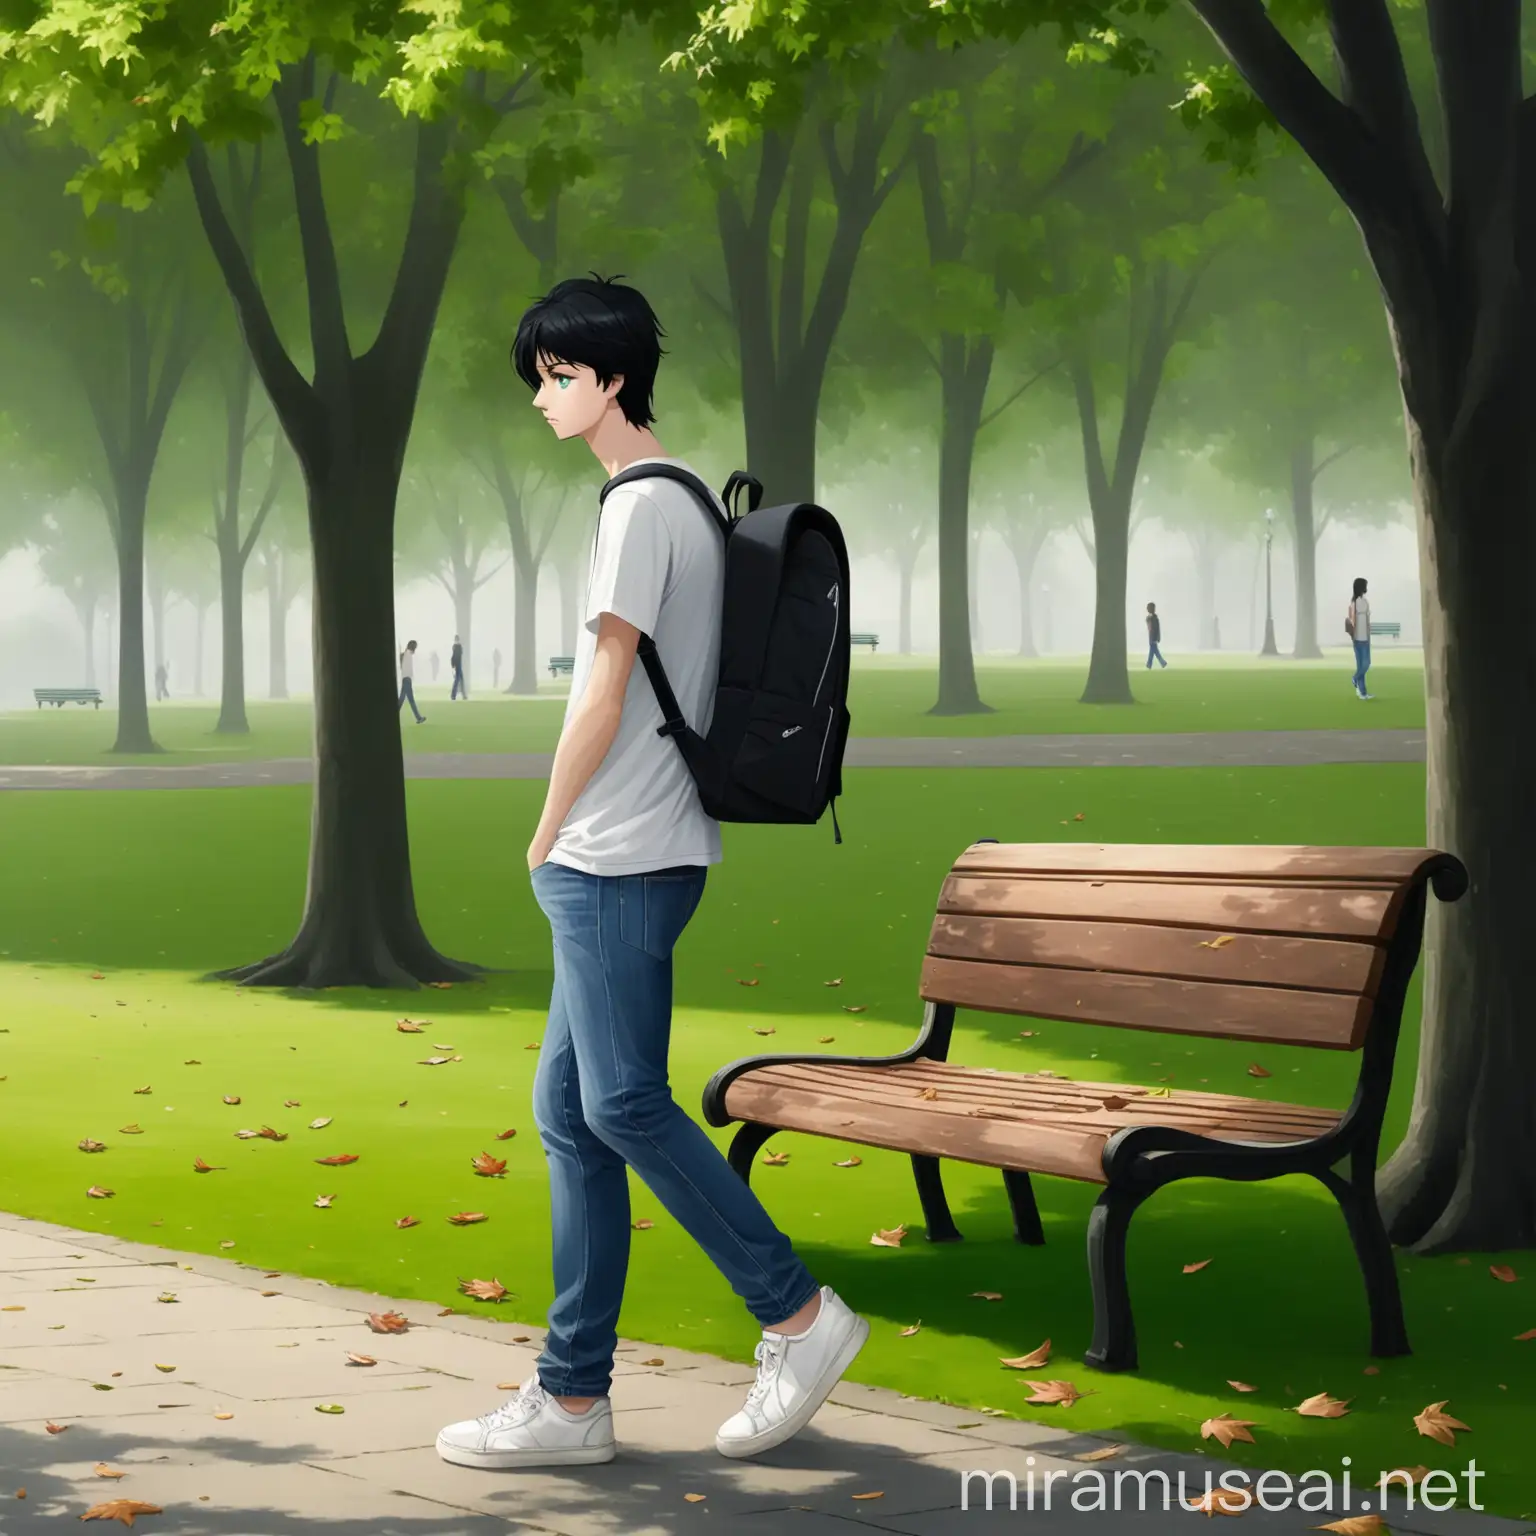 Young Woman Walking Thoughtfully in Serene Park Setting